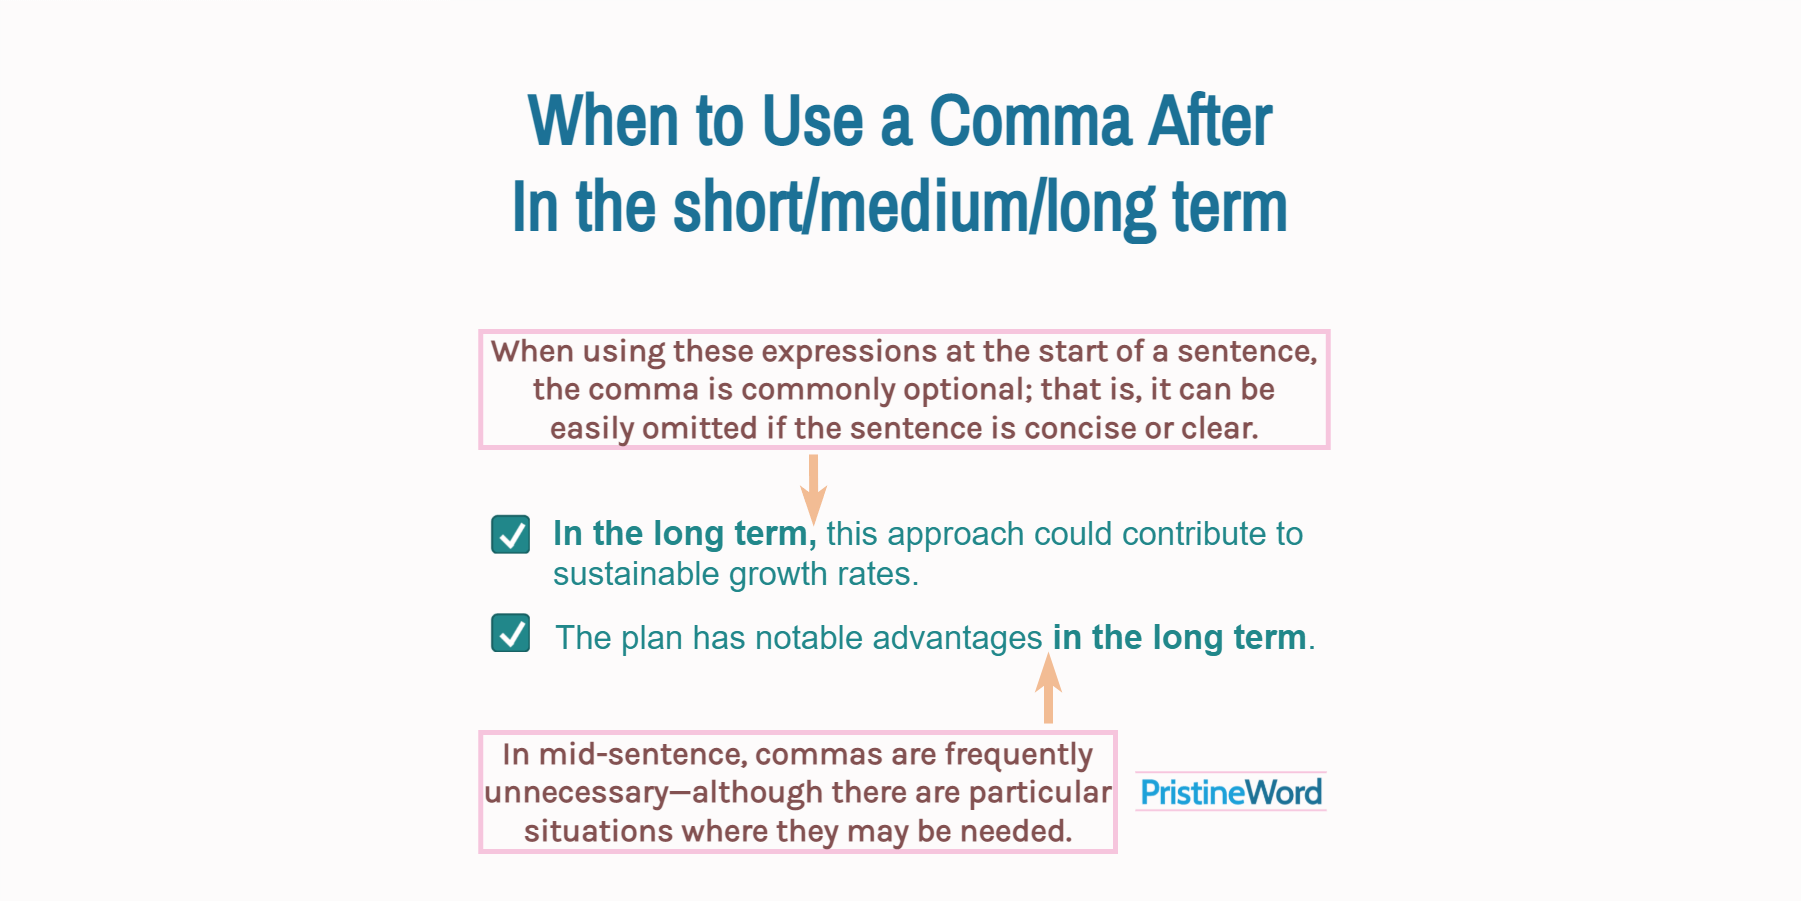 Do You Need a Comma After In the short/medium/long term?